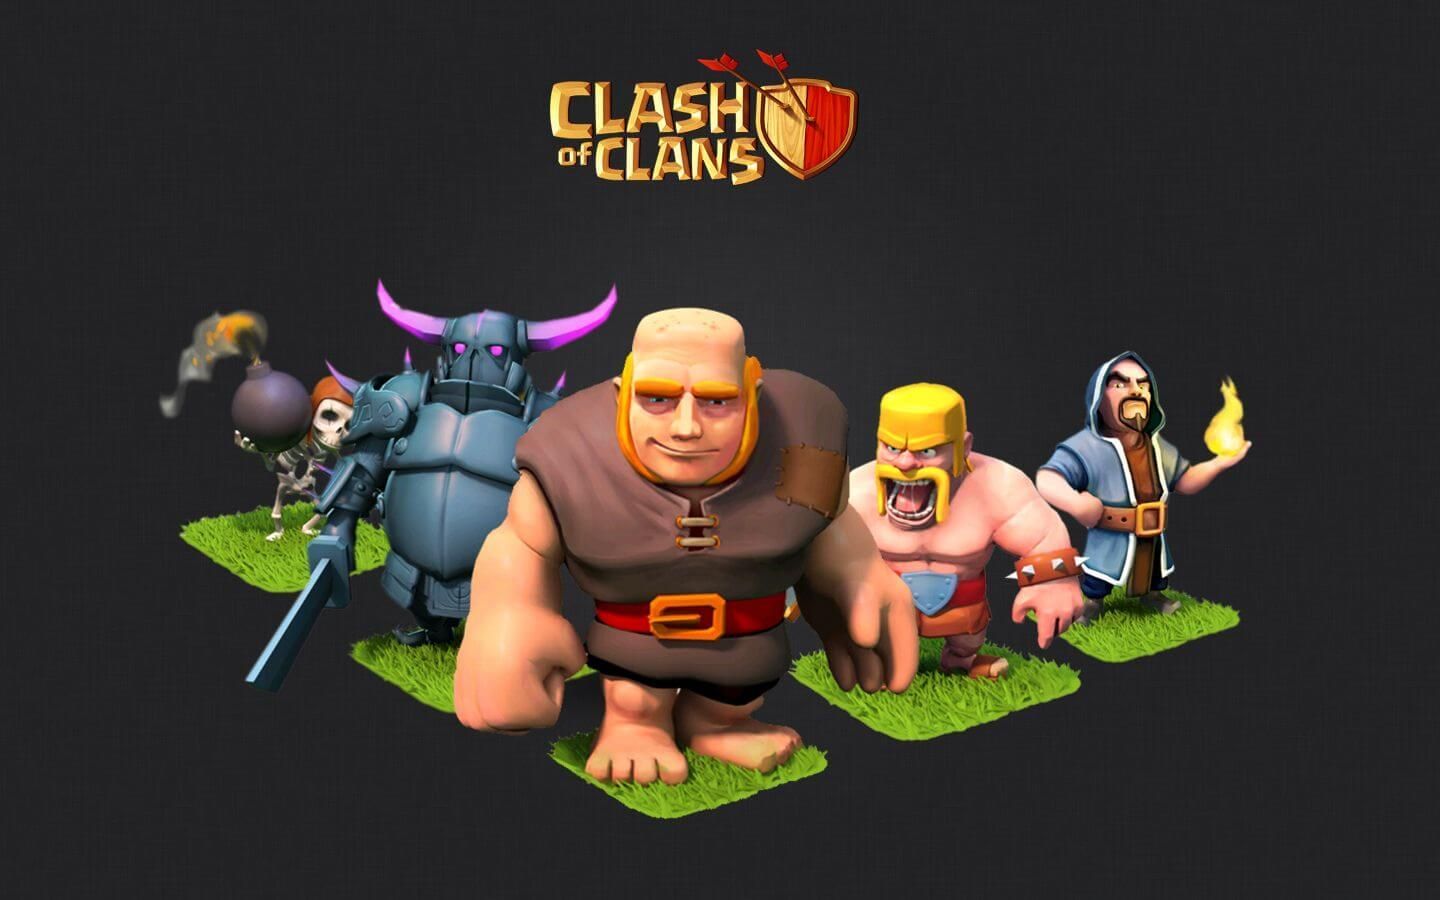 Clash Of Clans Wallpaper and Photo 4K Full HD #ClashofClans #ClashofClansWallpaper #GameWallpaper. Clash of clans game, Clash of clans, Clan games